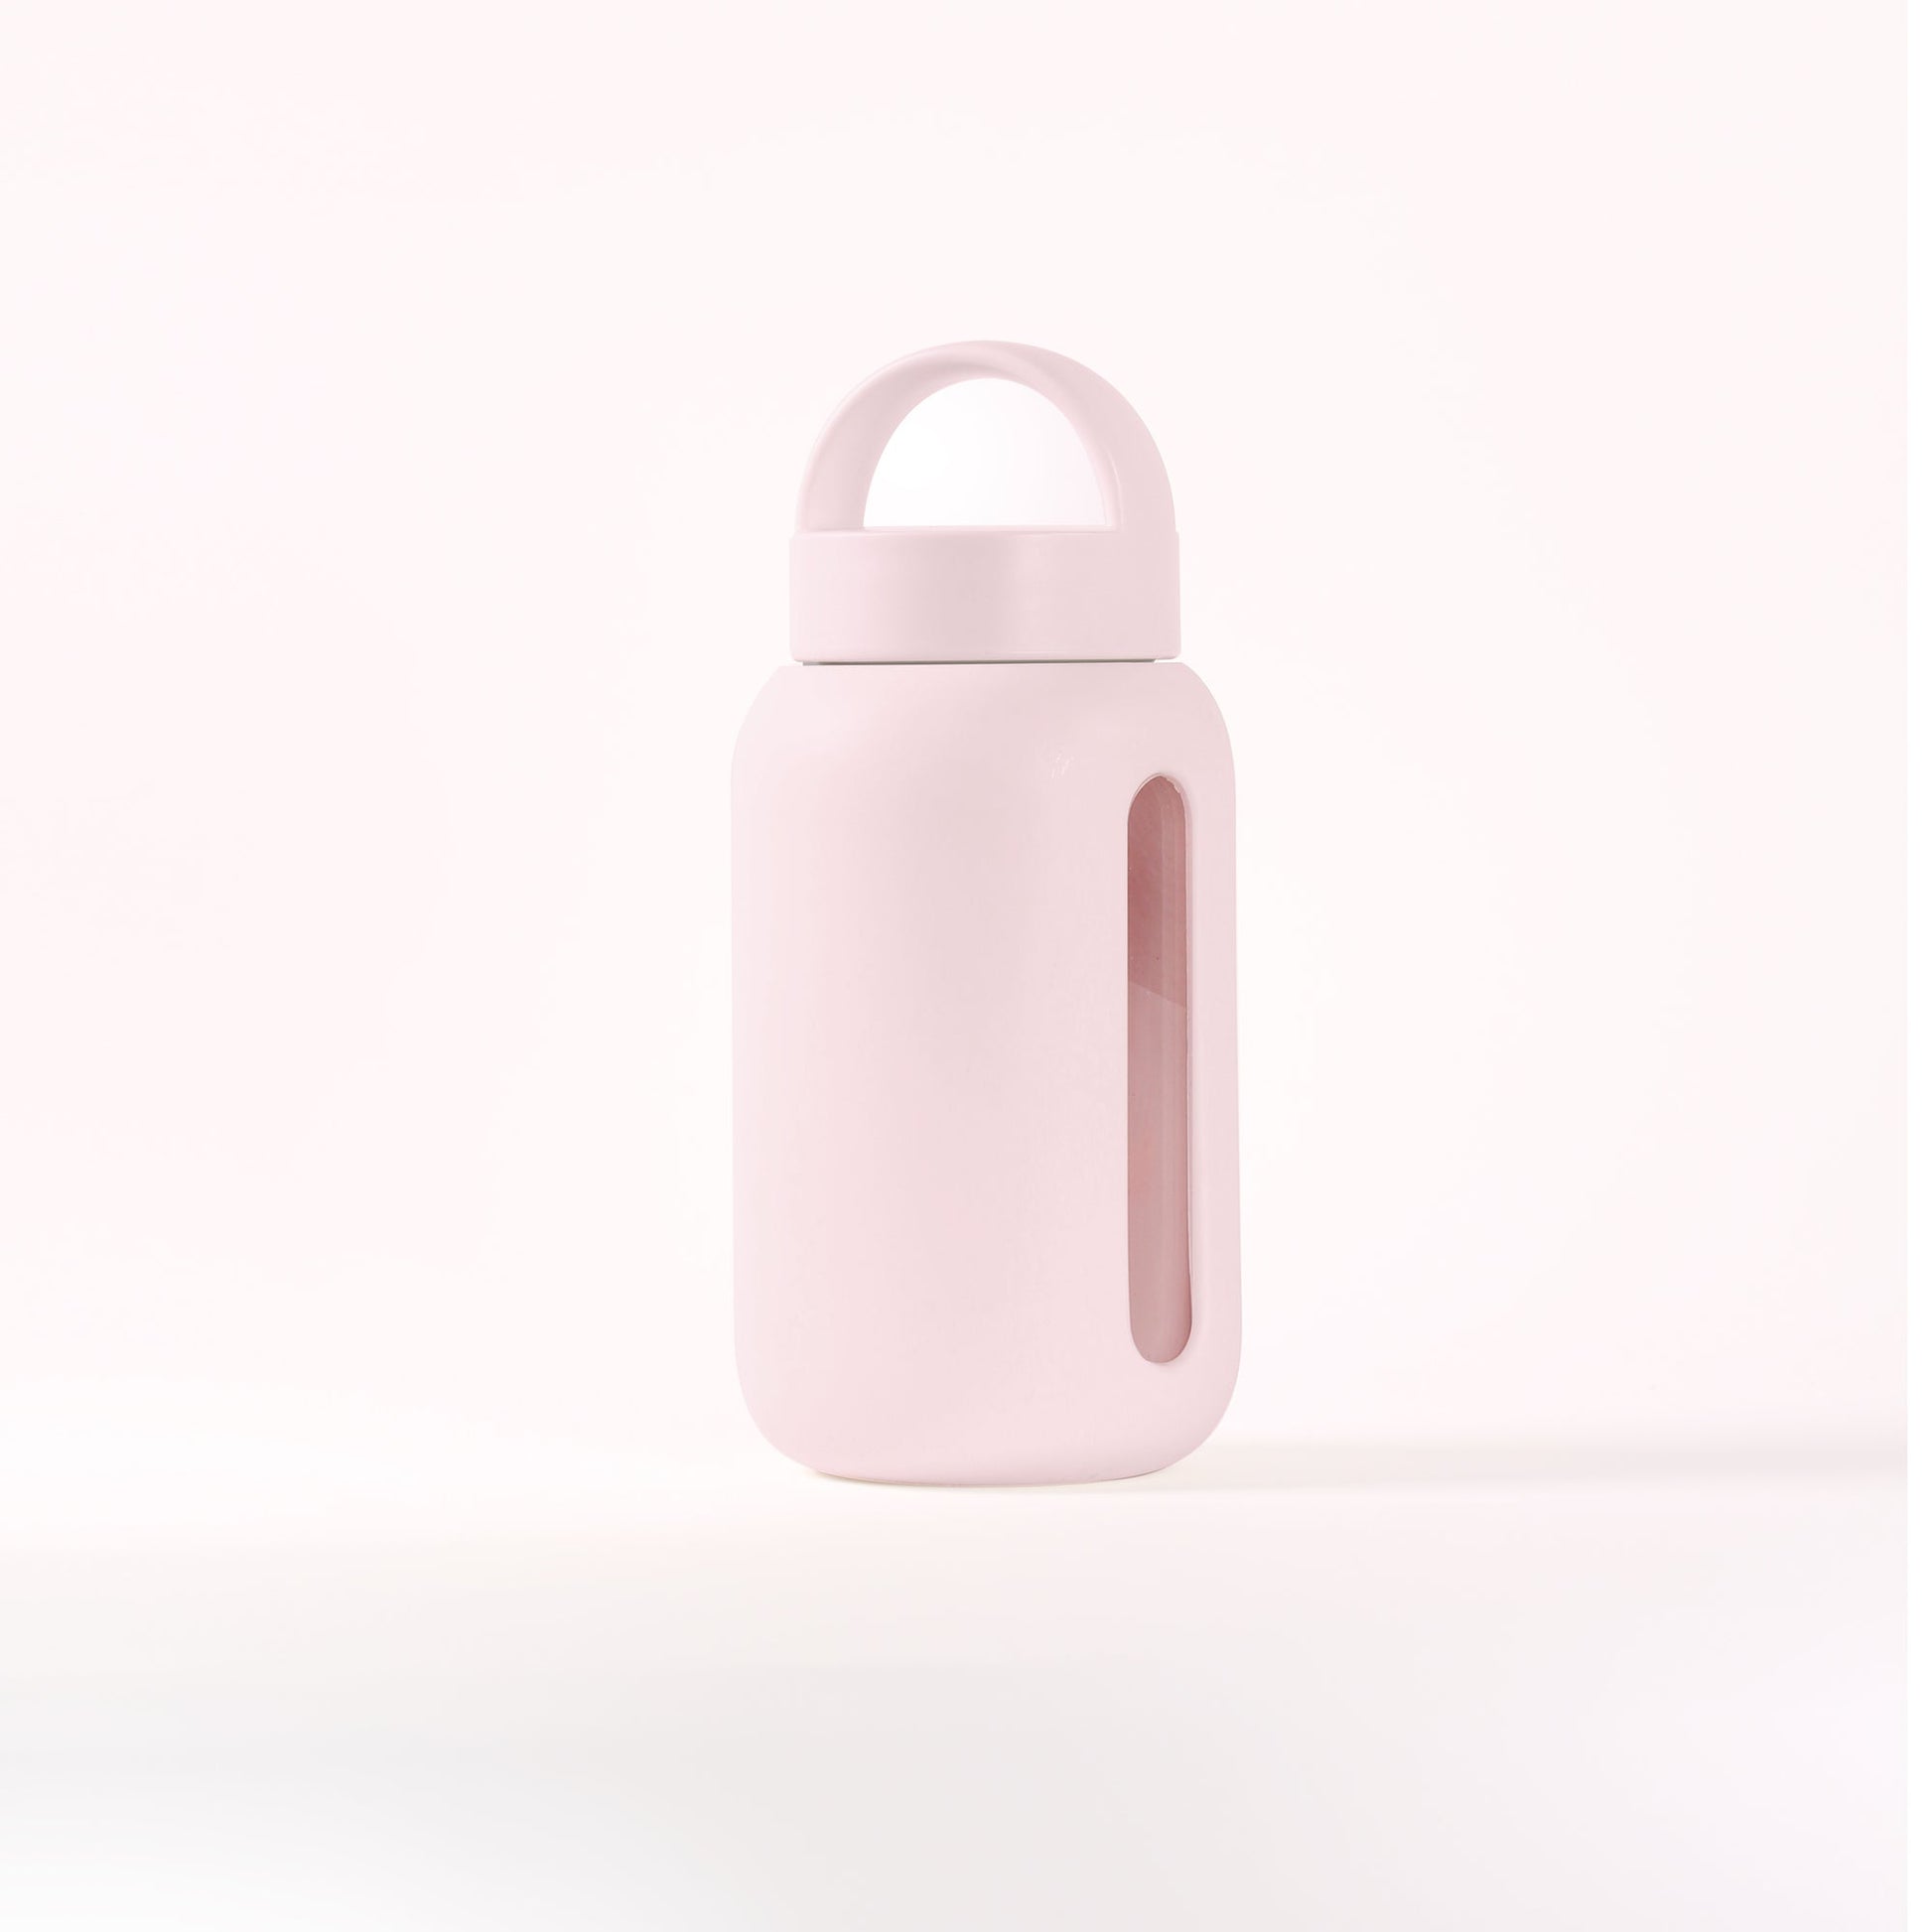 A fun and practical companion. Mini bottle offers a convenient way to stay hydrated on-the-go. Ditch your other bottle and trust this little glass one instead. Aside from water, she's perfect for your iced coffee, matcha, tea, smoothie, protein shakes, anything really!